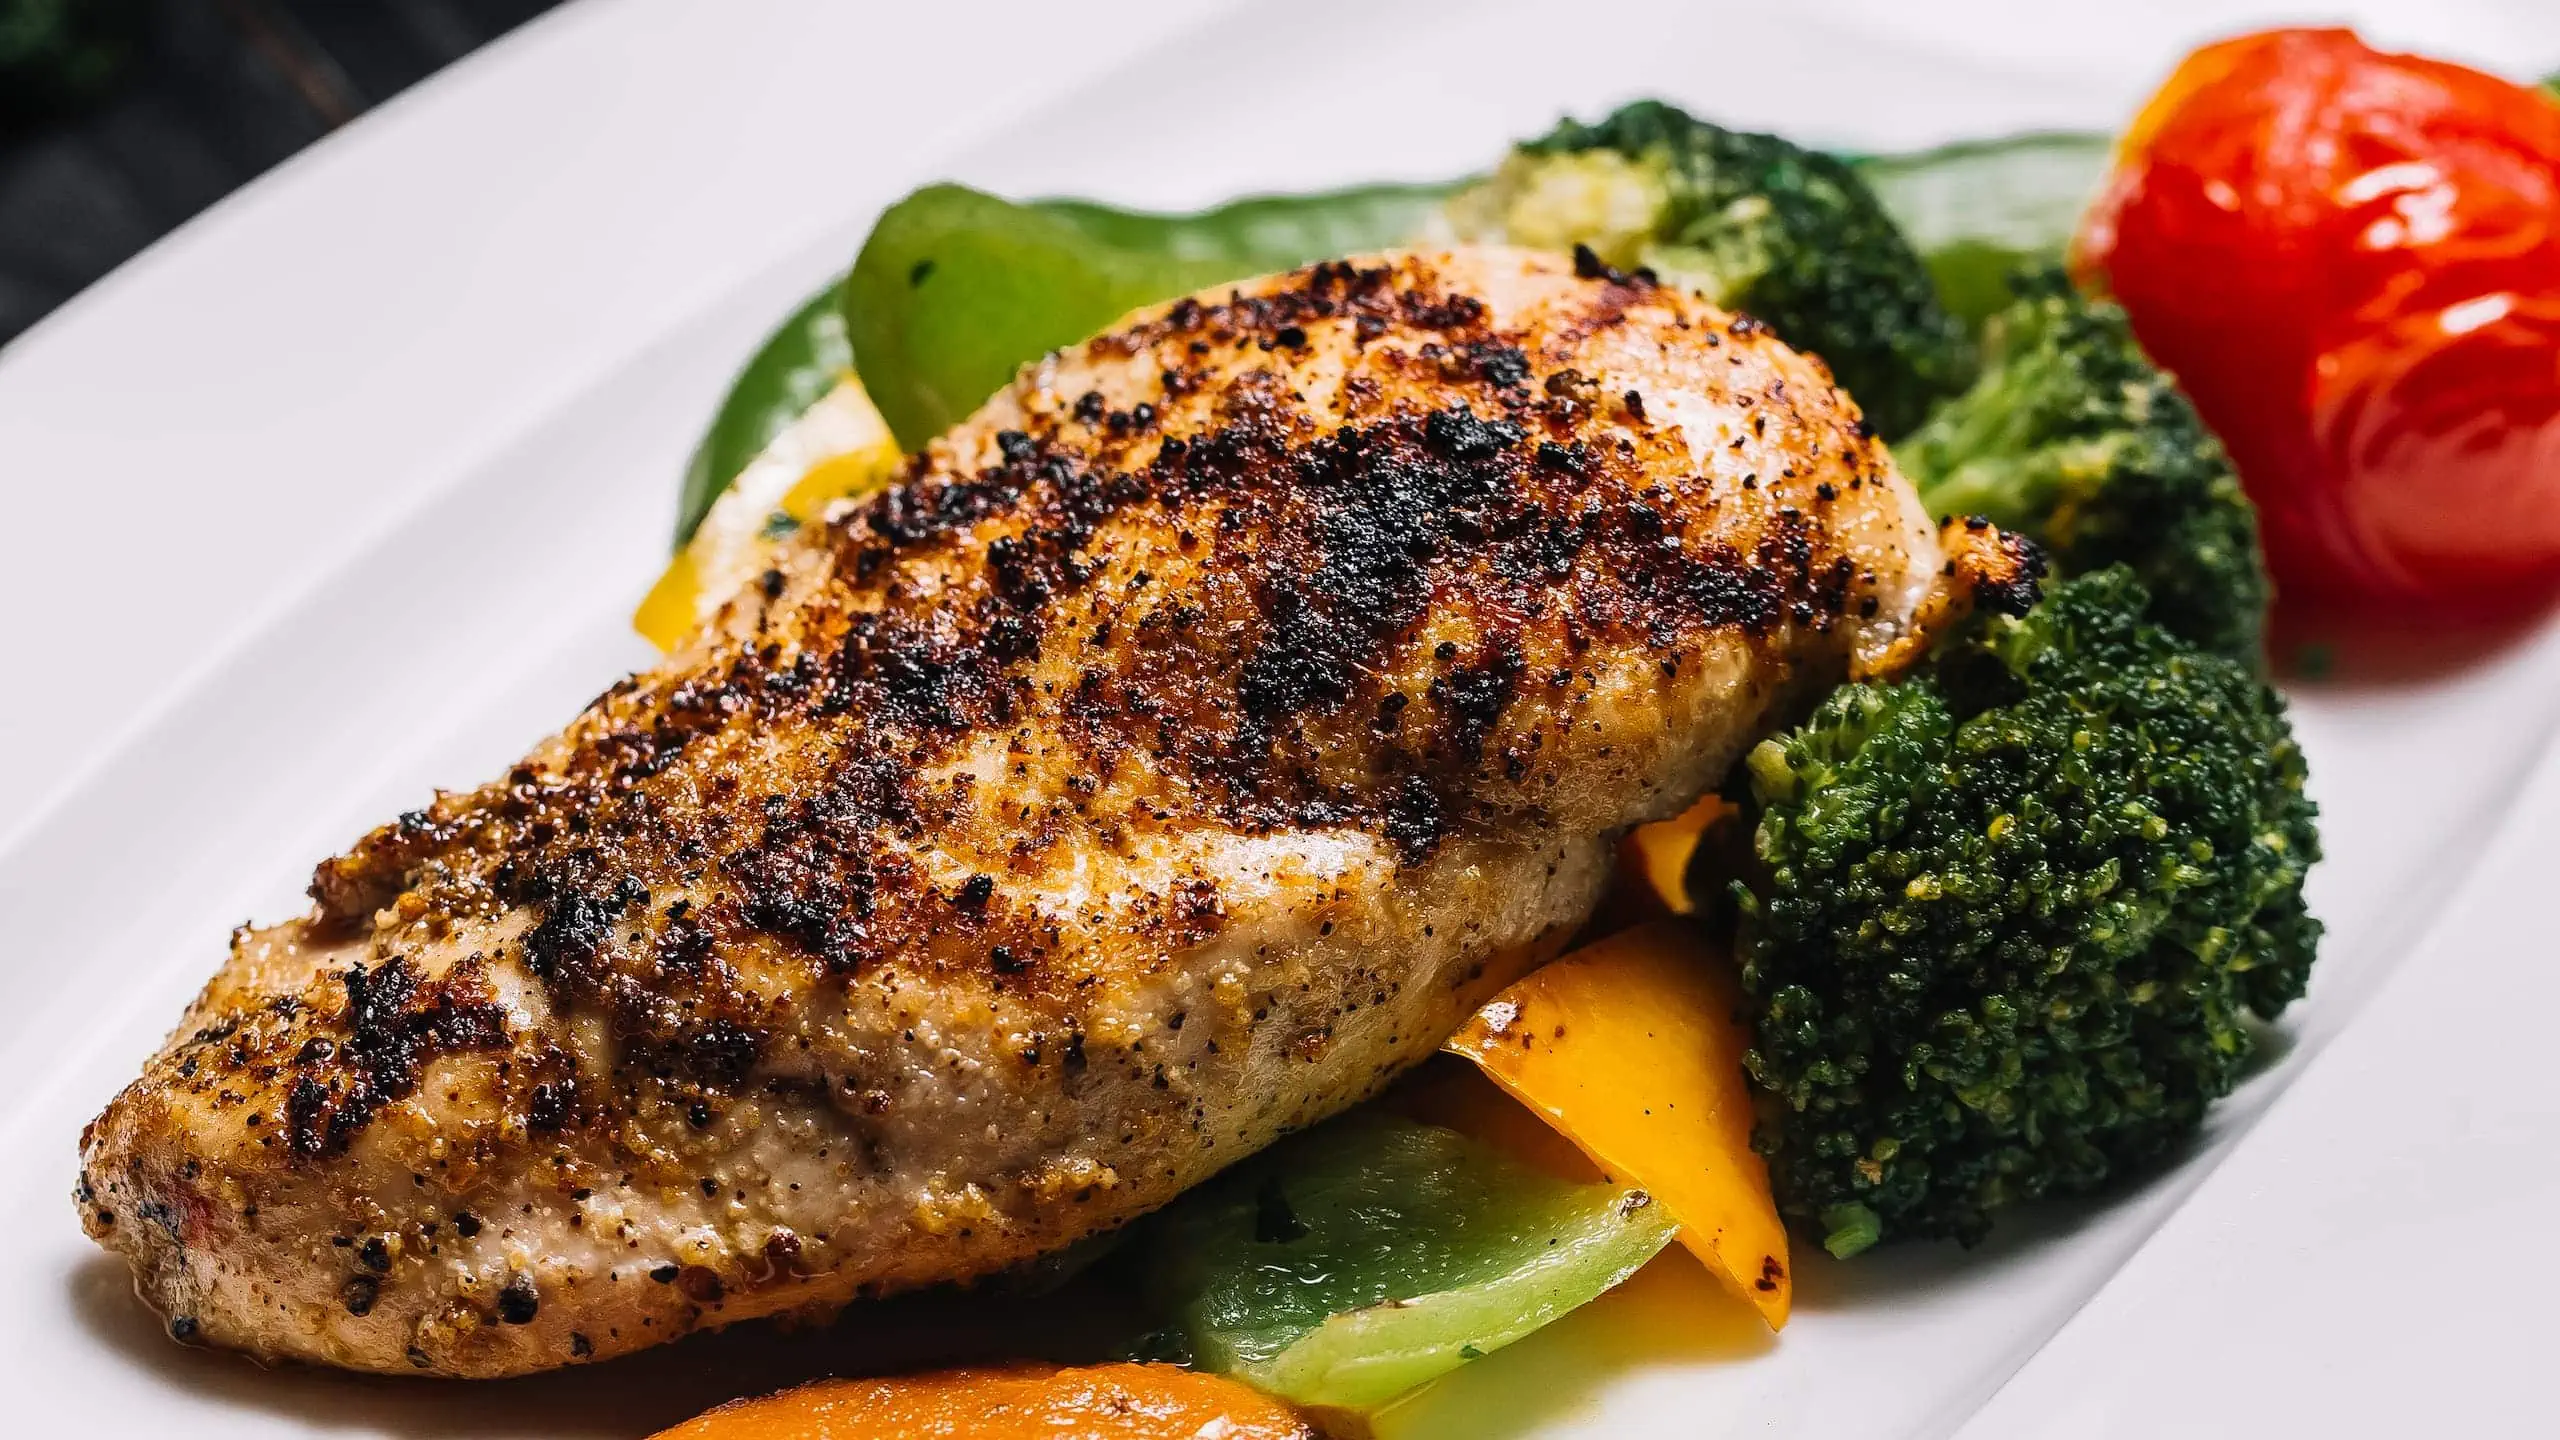 Texas Roadhouse herb crusted chicken recipe with grilled vegetables